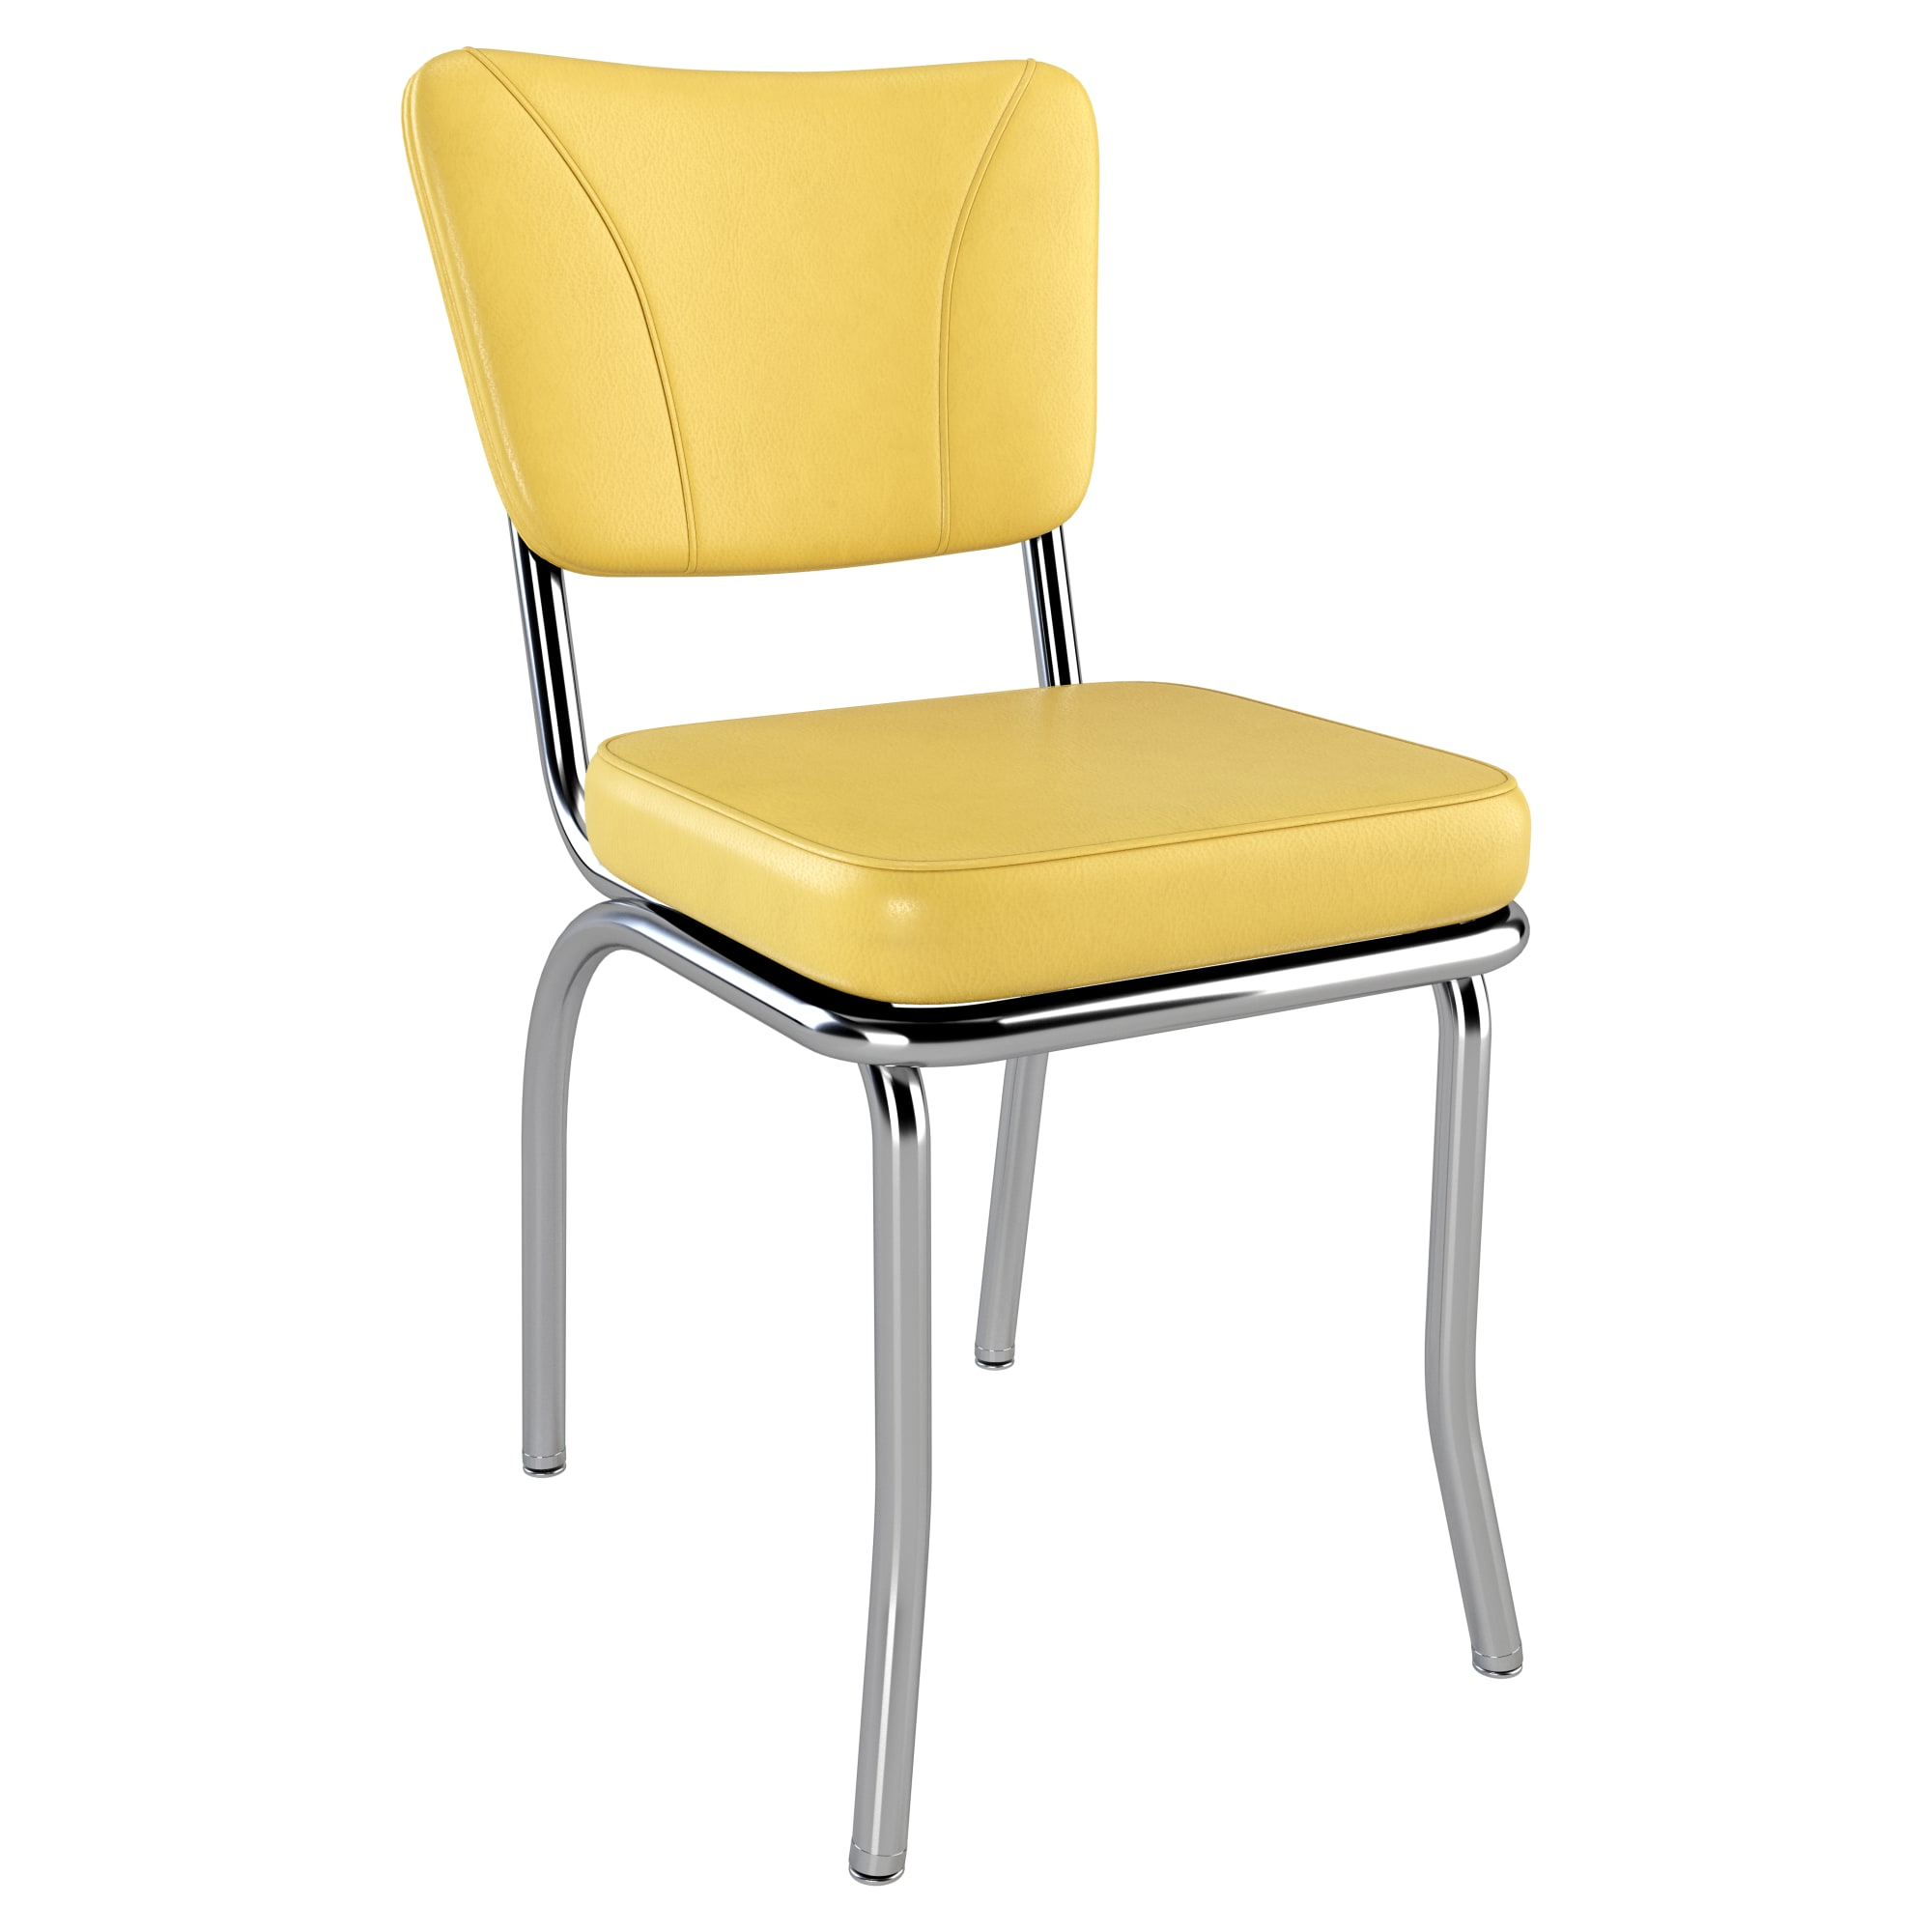 American V Shape Diner Chair with American V Shape Diner Chair